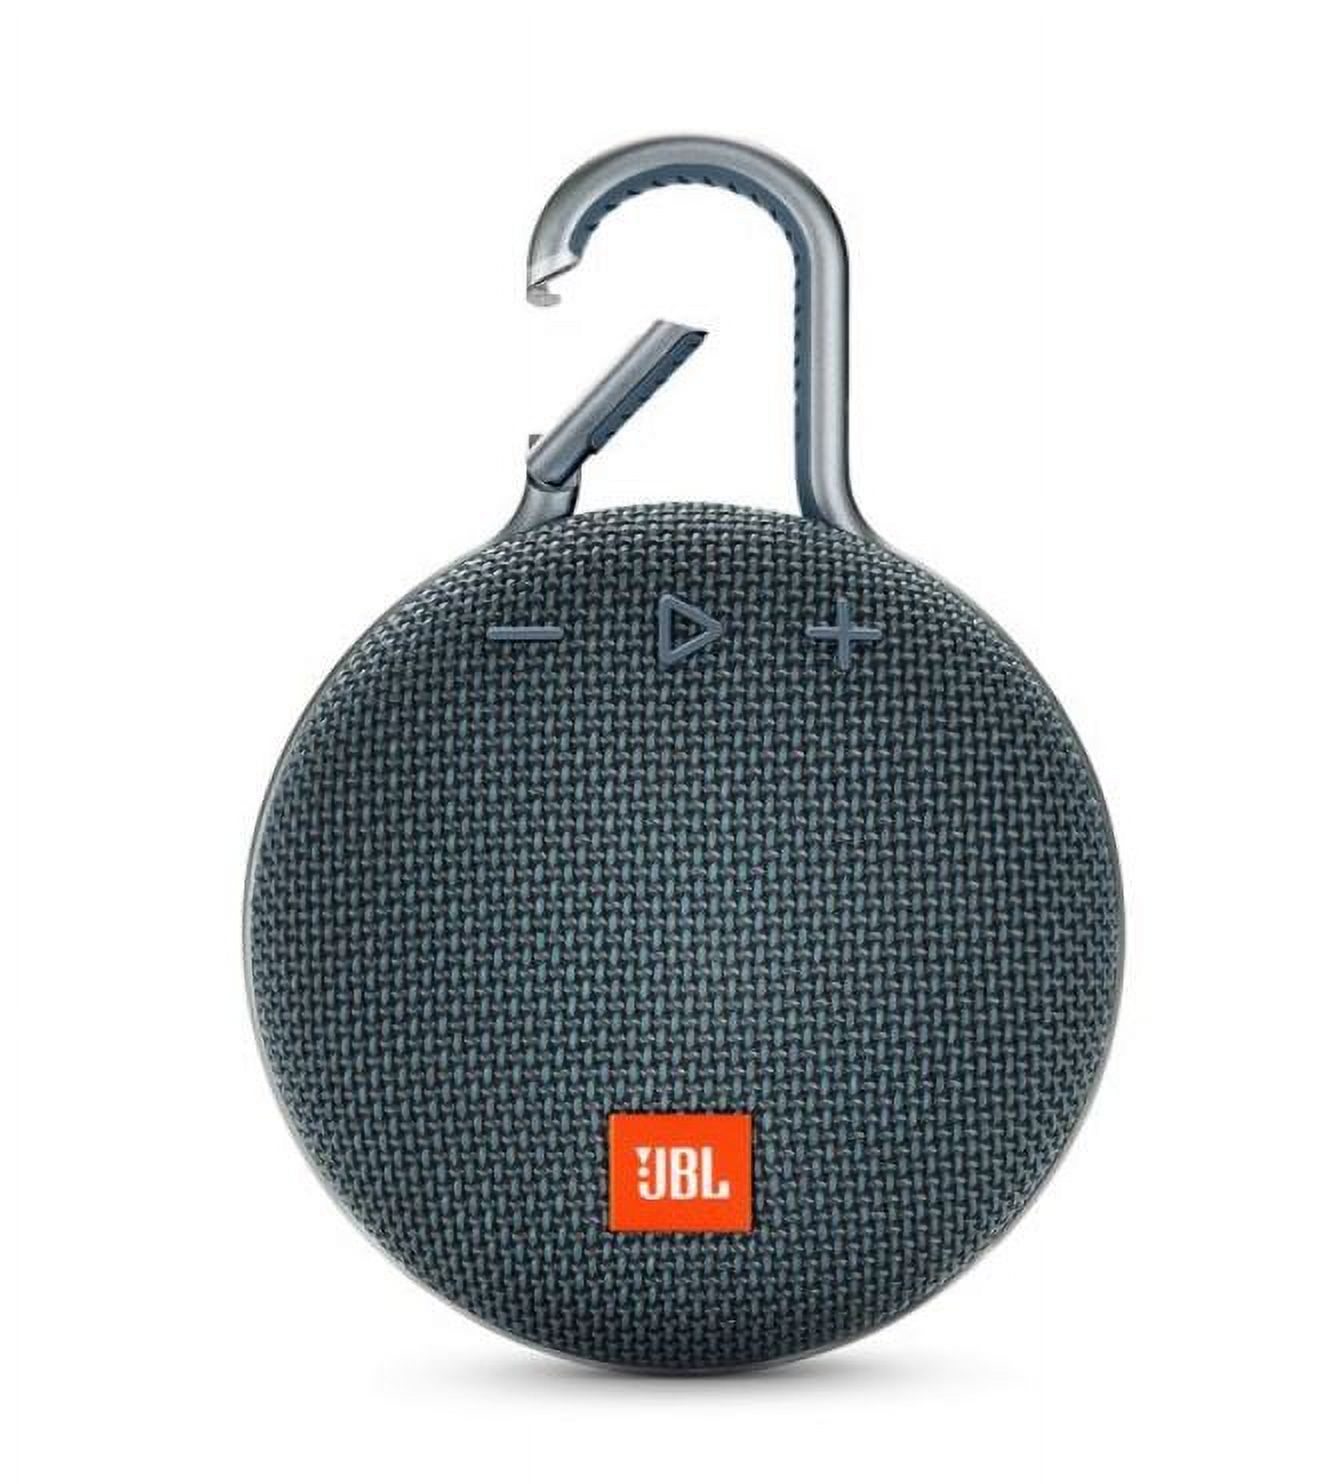 JBL Clip 3 Portable Bluetooth Speaker with Carabiner - Blue - image 1 of 5